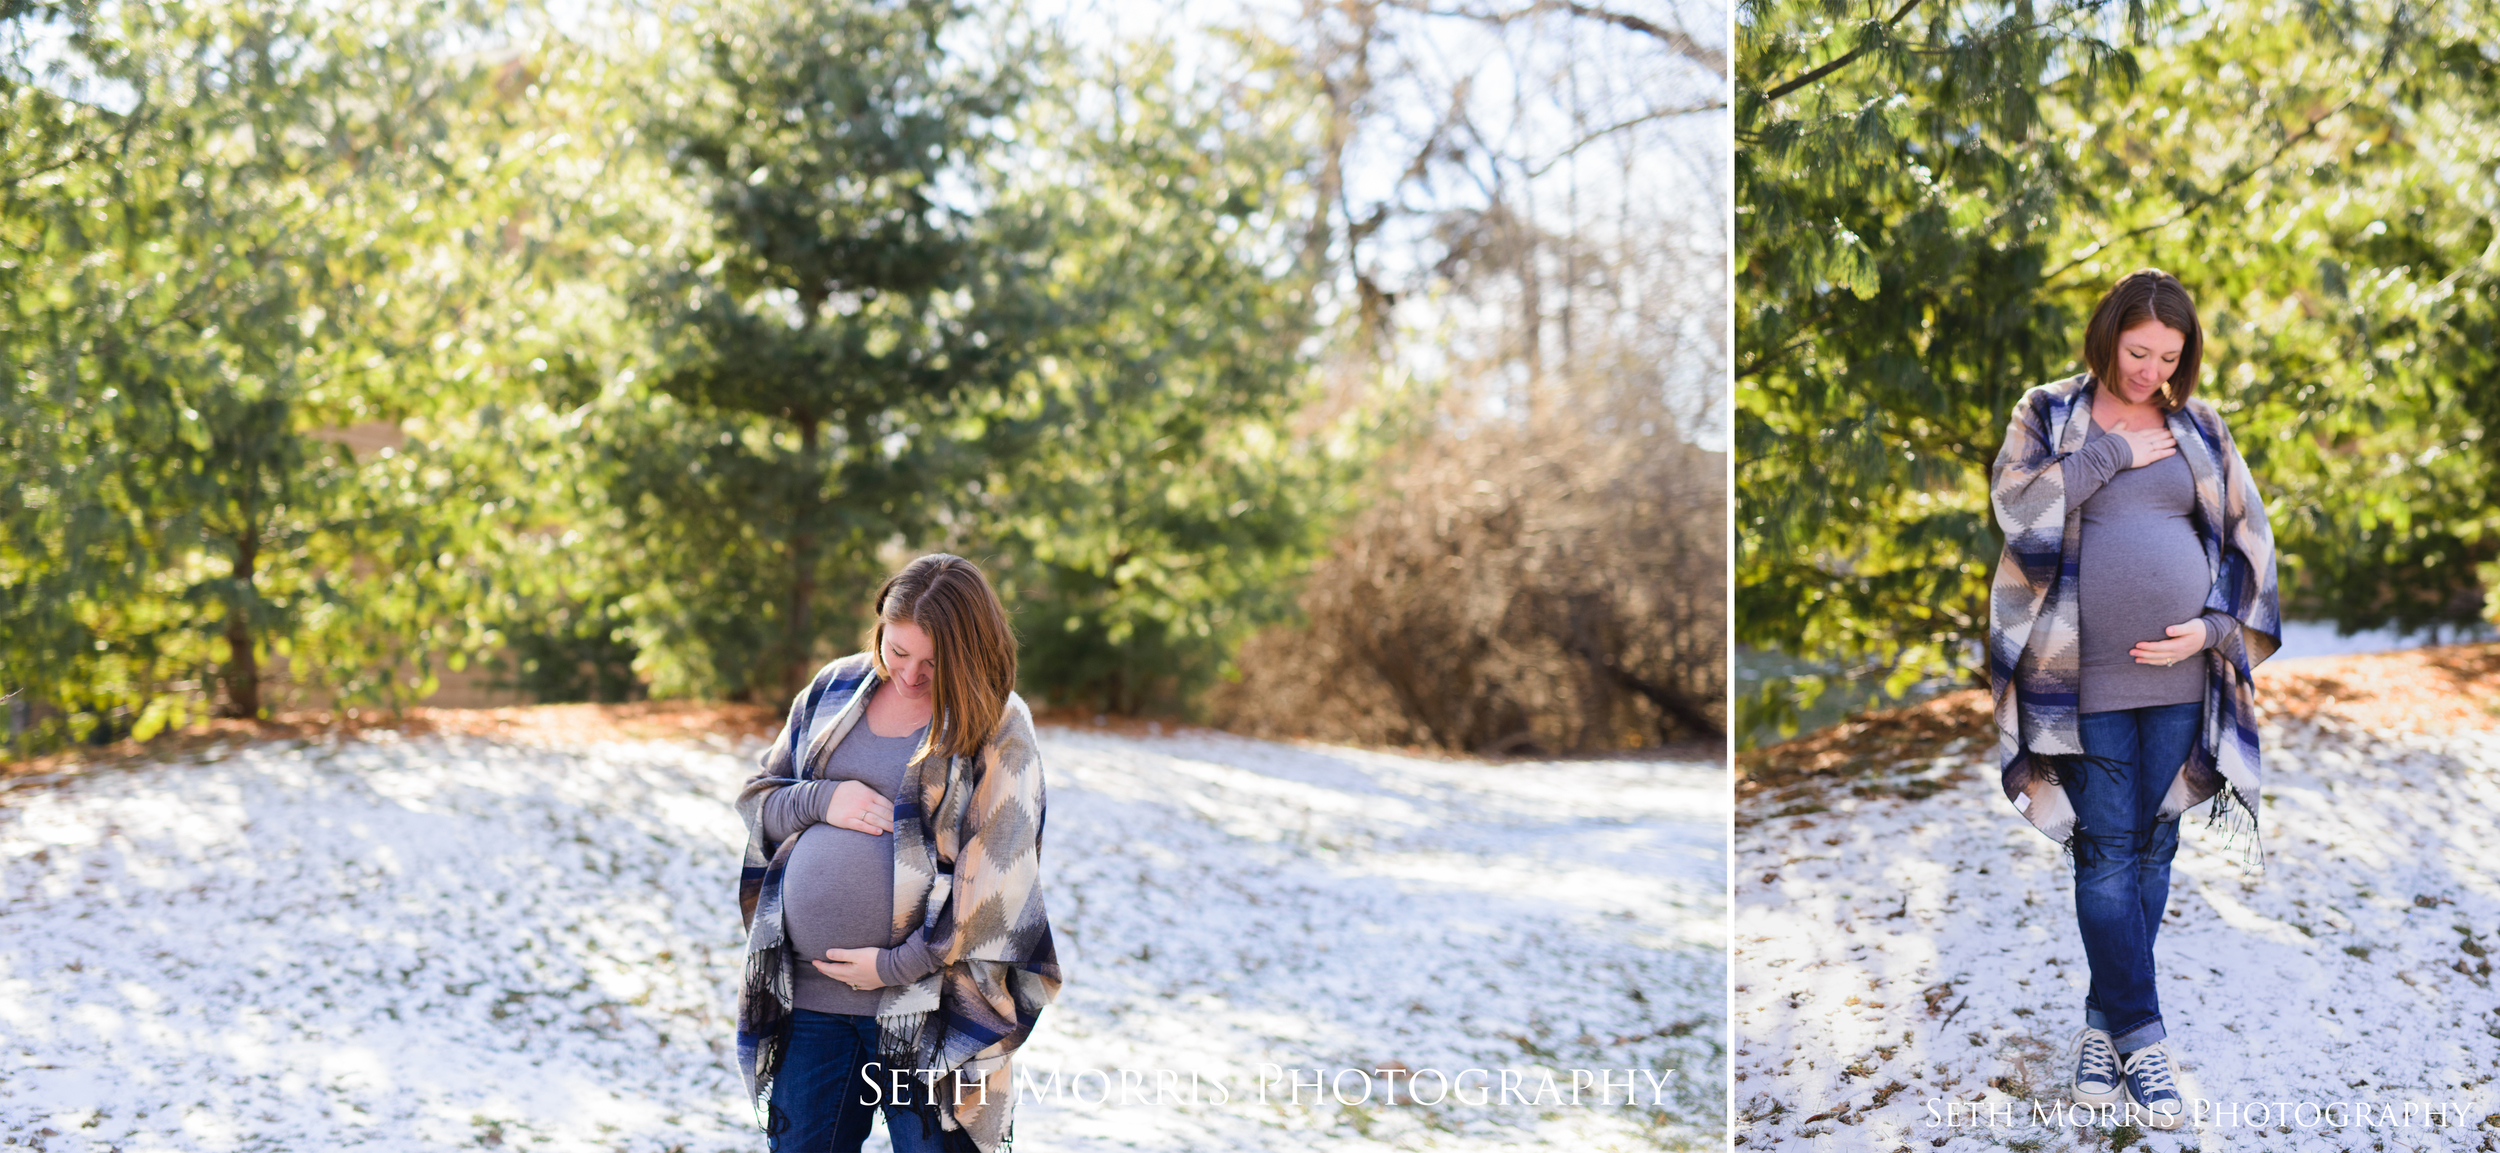 winter-maternity-pictures-chicagoland-photographer-8.JPG